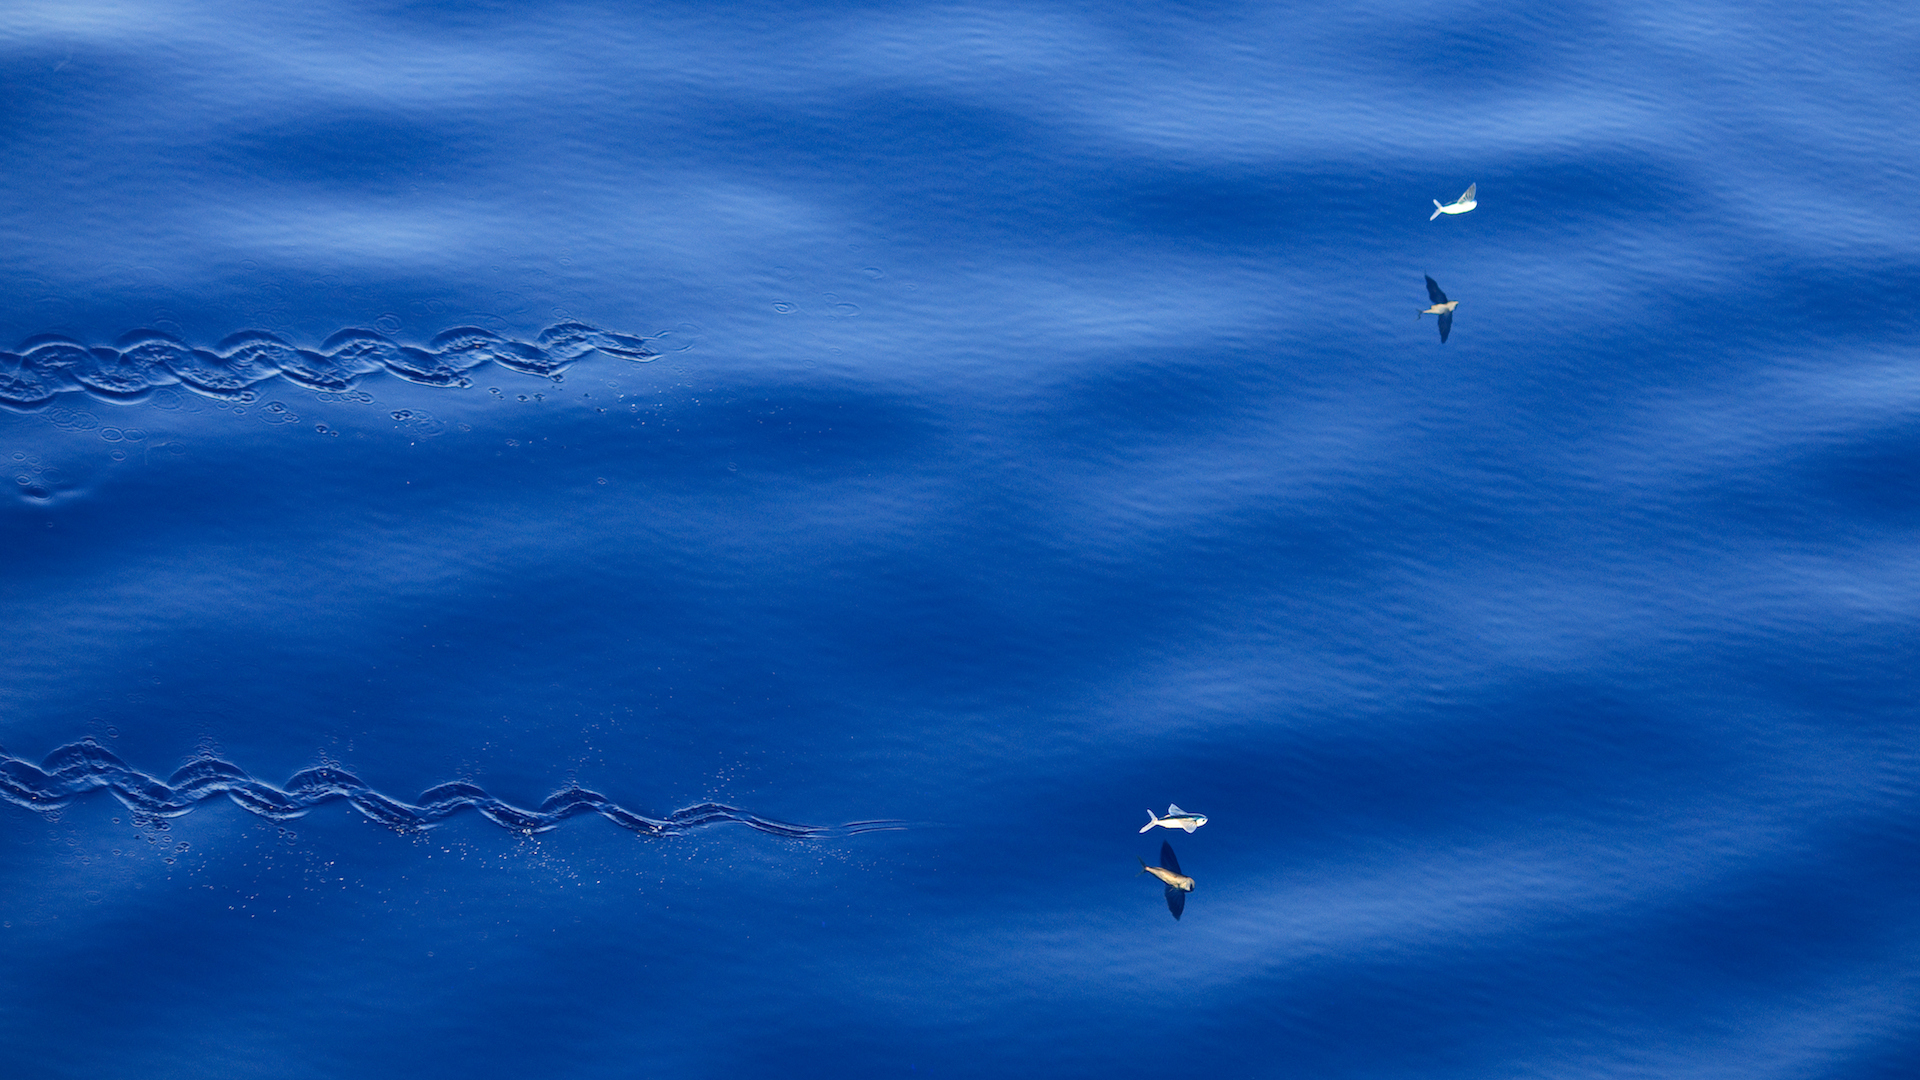 Aerial view of two flying fish gliding above water.